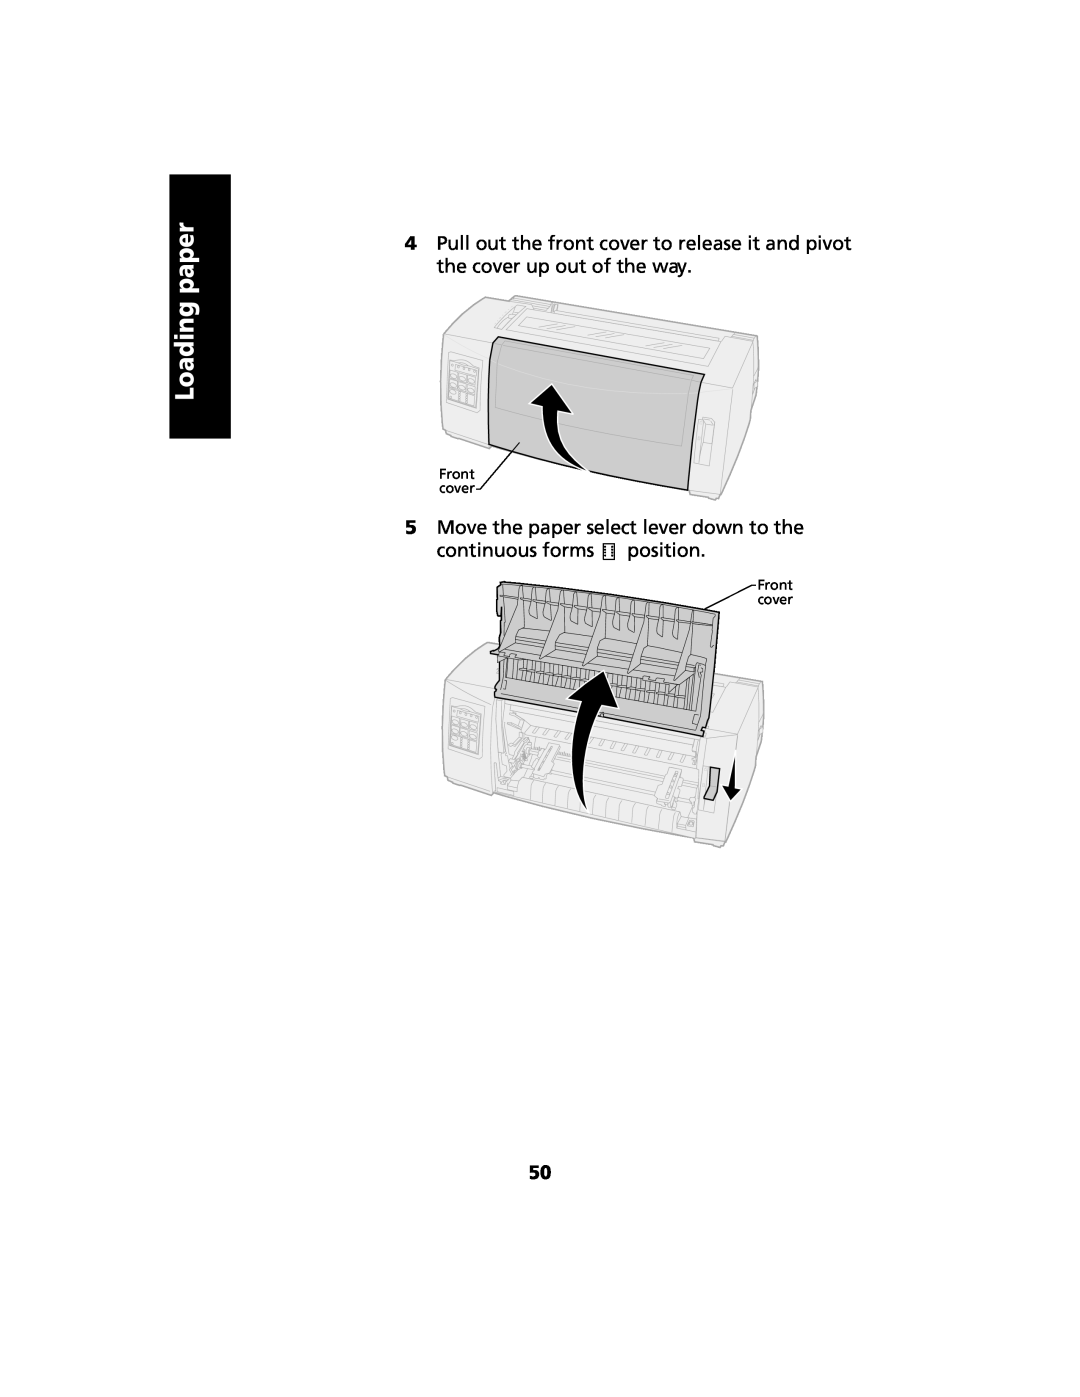 Lexmark 2480 manual Loading paper, Move the paper select lever down to the continuous forms position, Front cover 